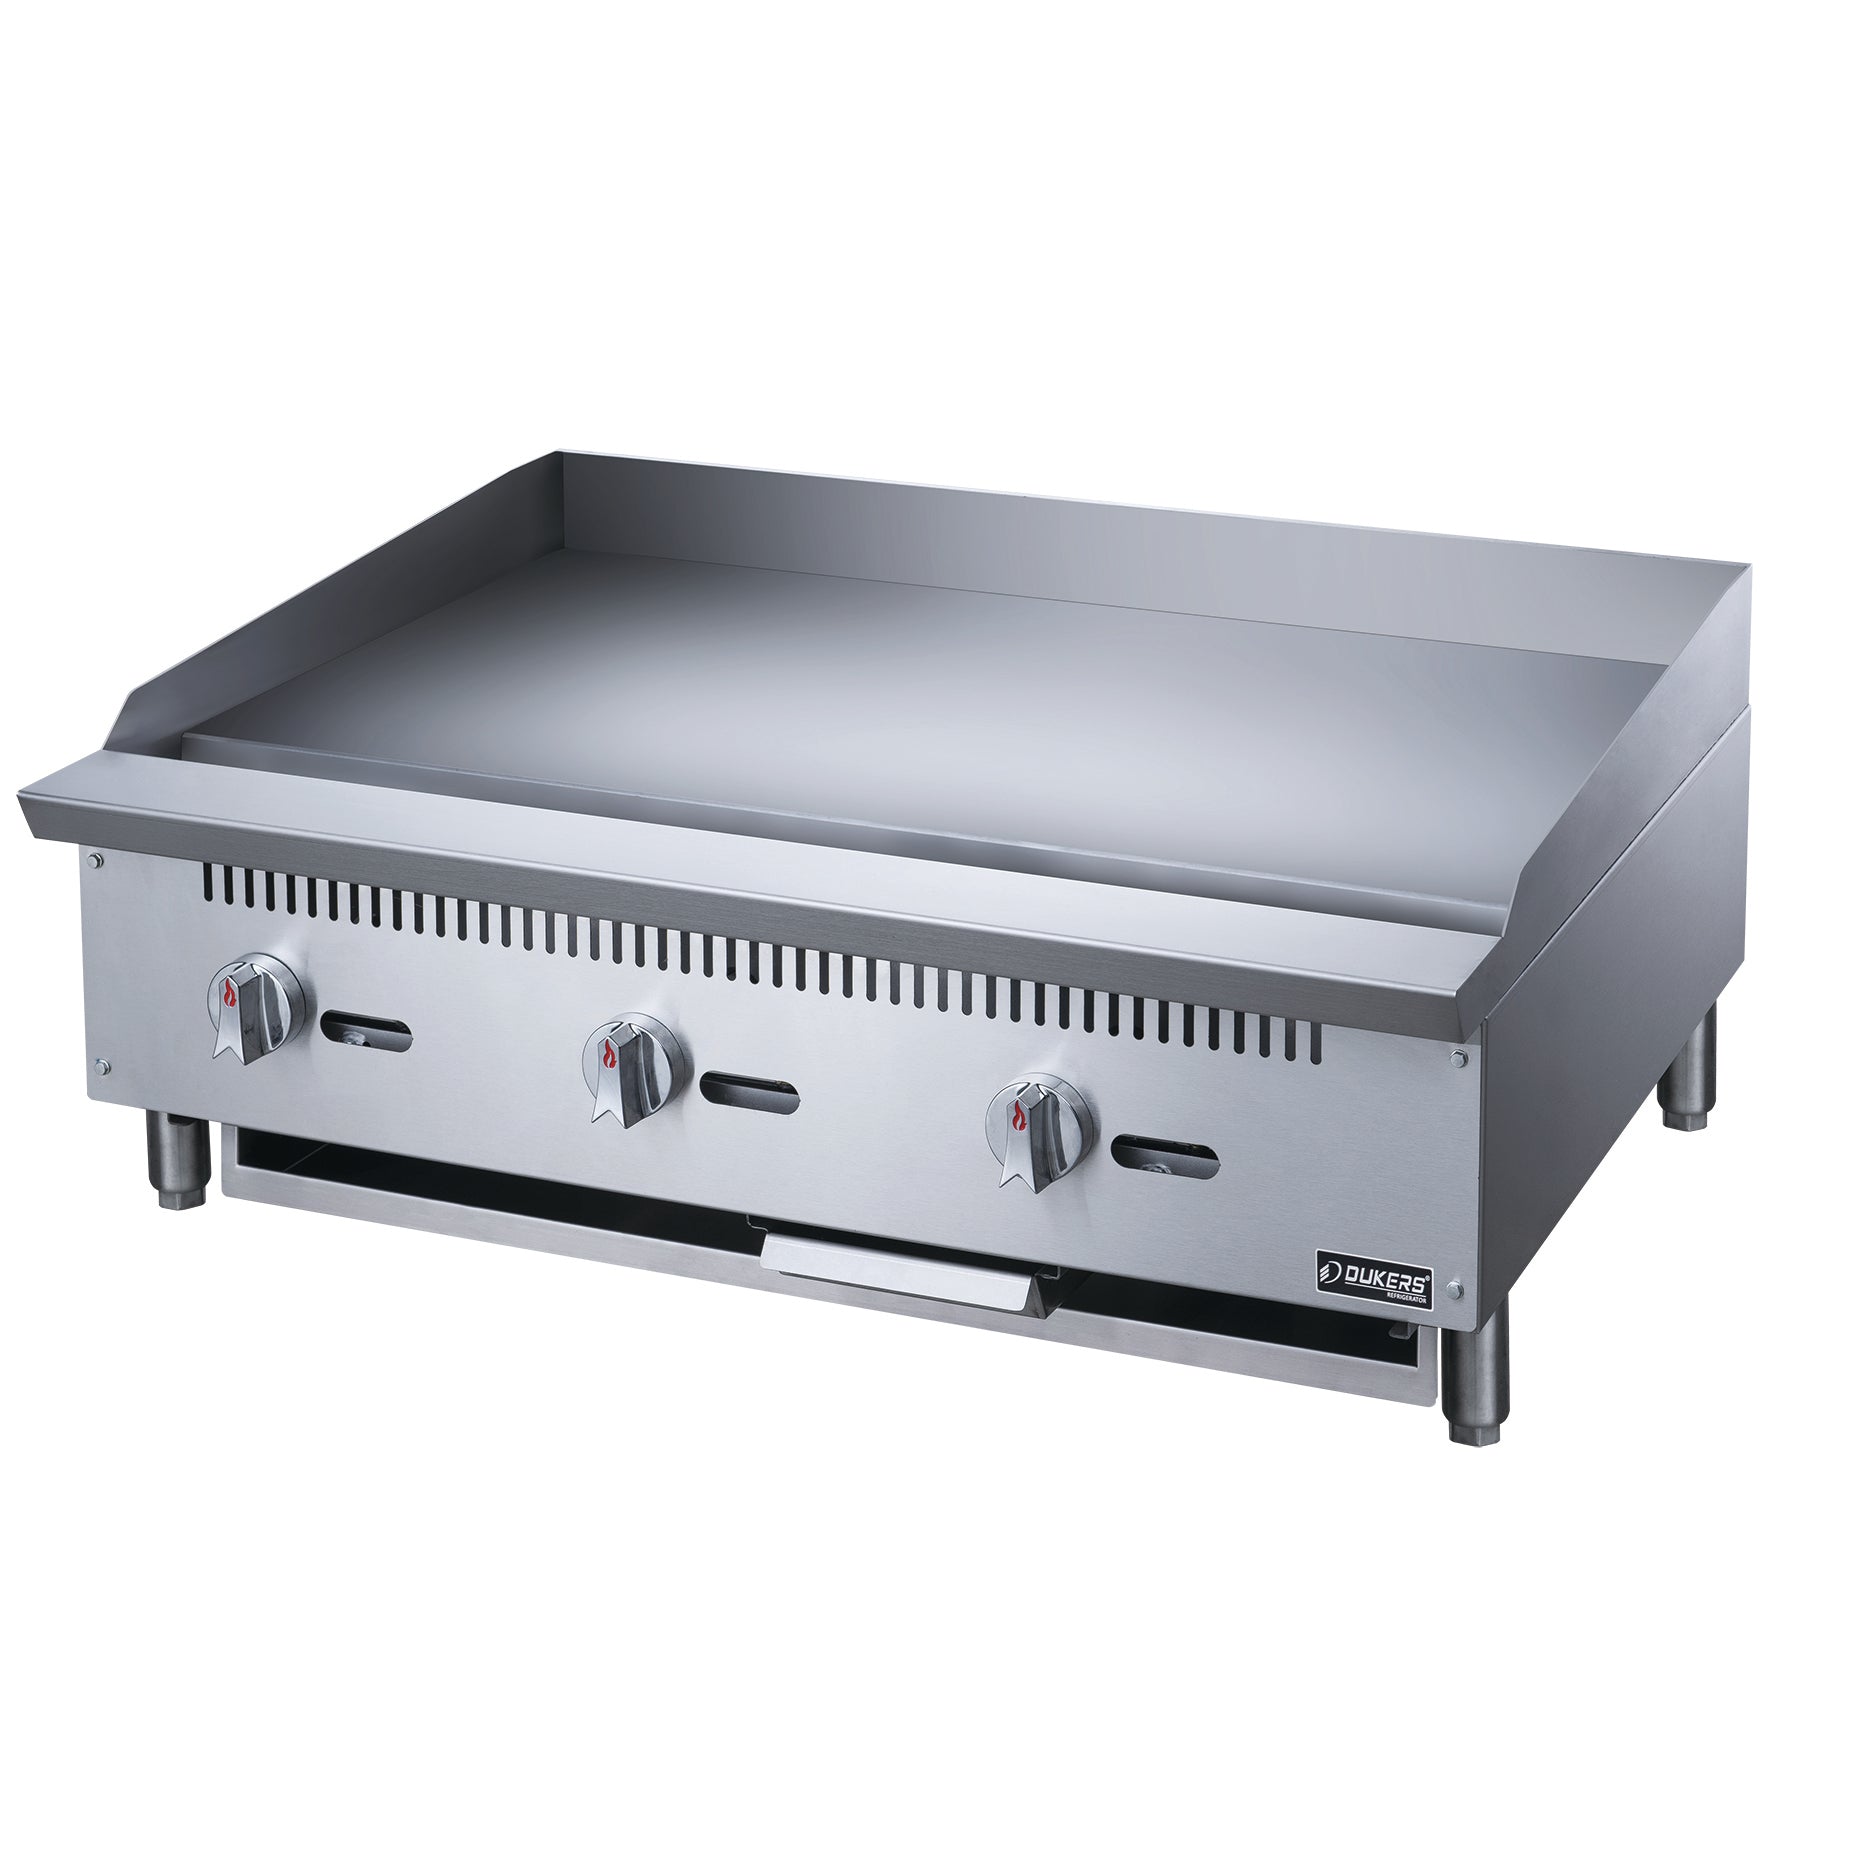 Dukers DCGMA36 36 inch Countertop Griddle